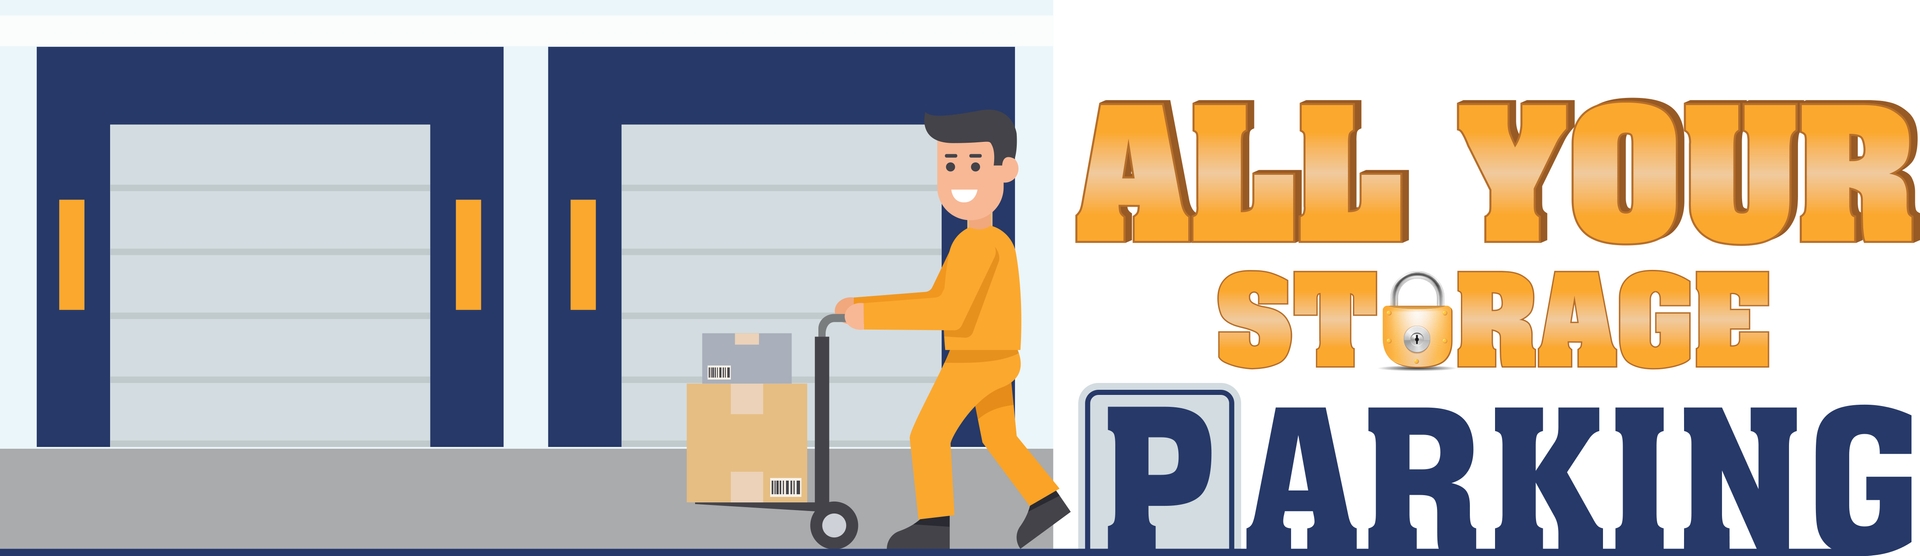 A illustration of a man moving some boxes towards a storage unit with the stylized text logo for 'All Your Storage' to the right of it